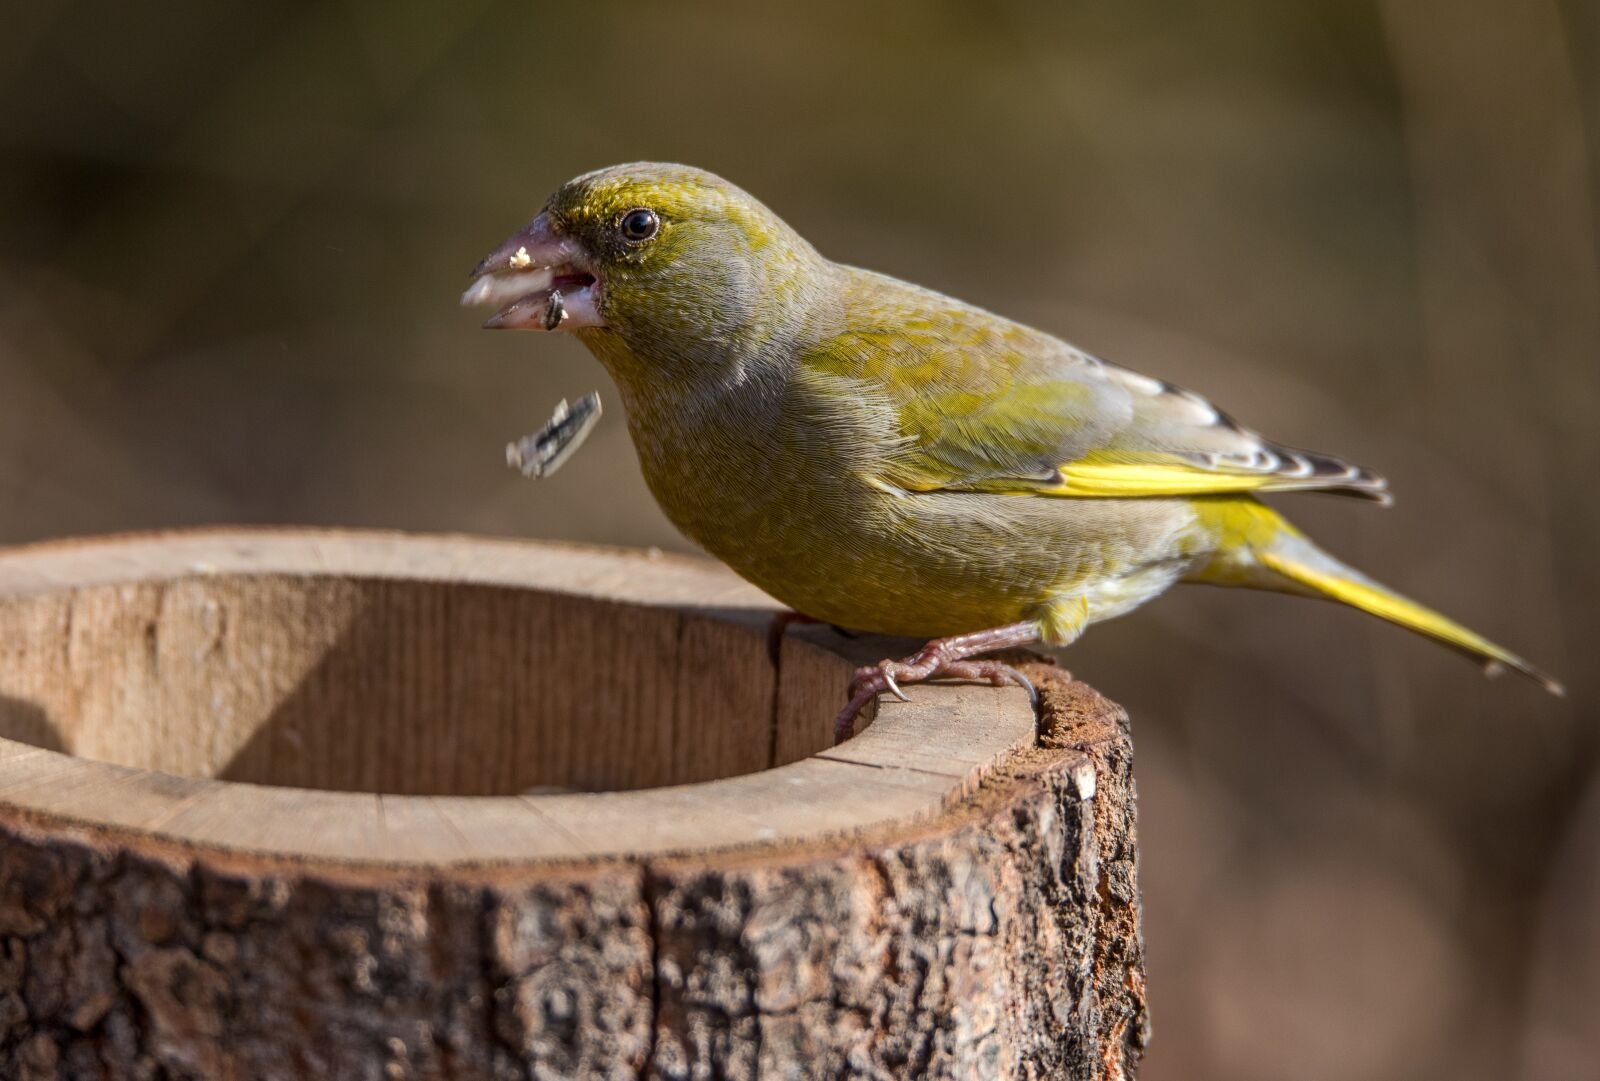 150-600mm F5-6.3 DG OS HSM | Sports 014 sample photo. Greenfinch, feeding place, grains photography